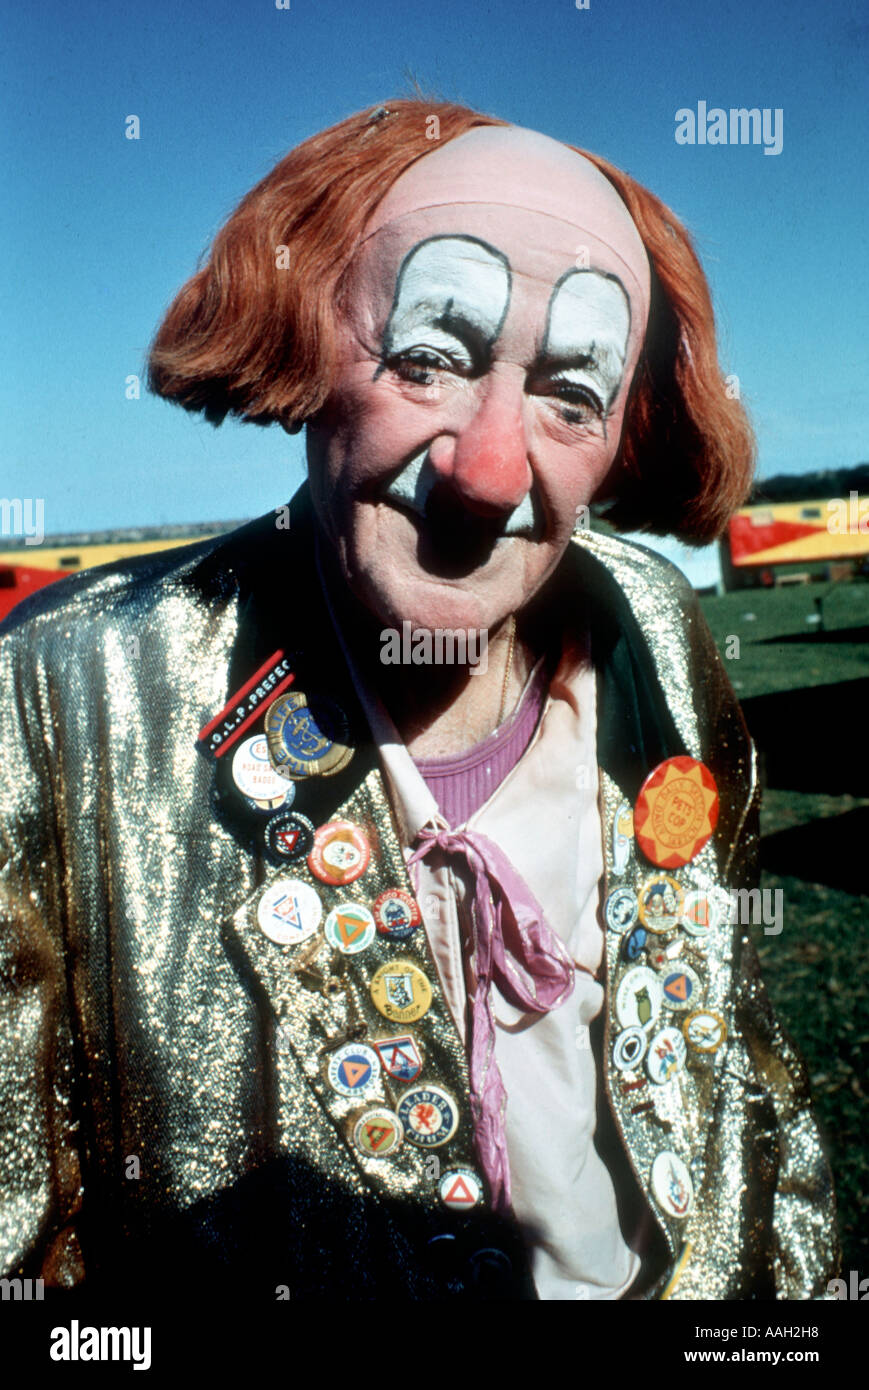 Coco der Clown abgebildet im Ringling Brothers Circus in Eastbourne, England, im Jahre 1974 Stockfoto